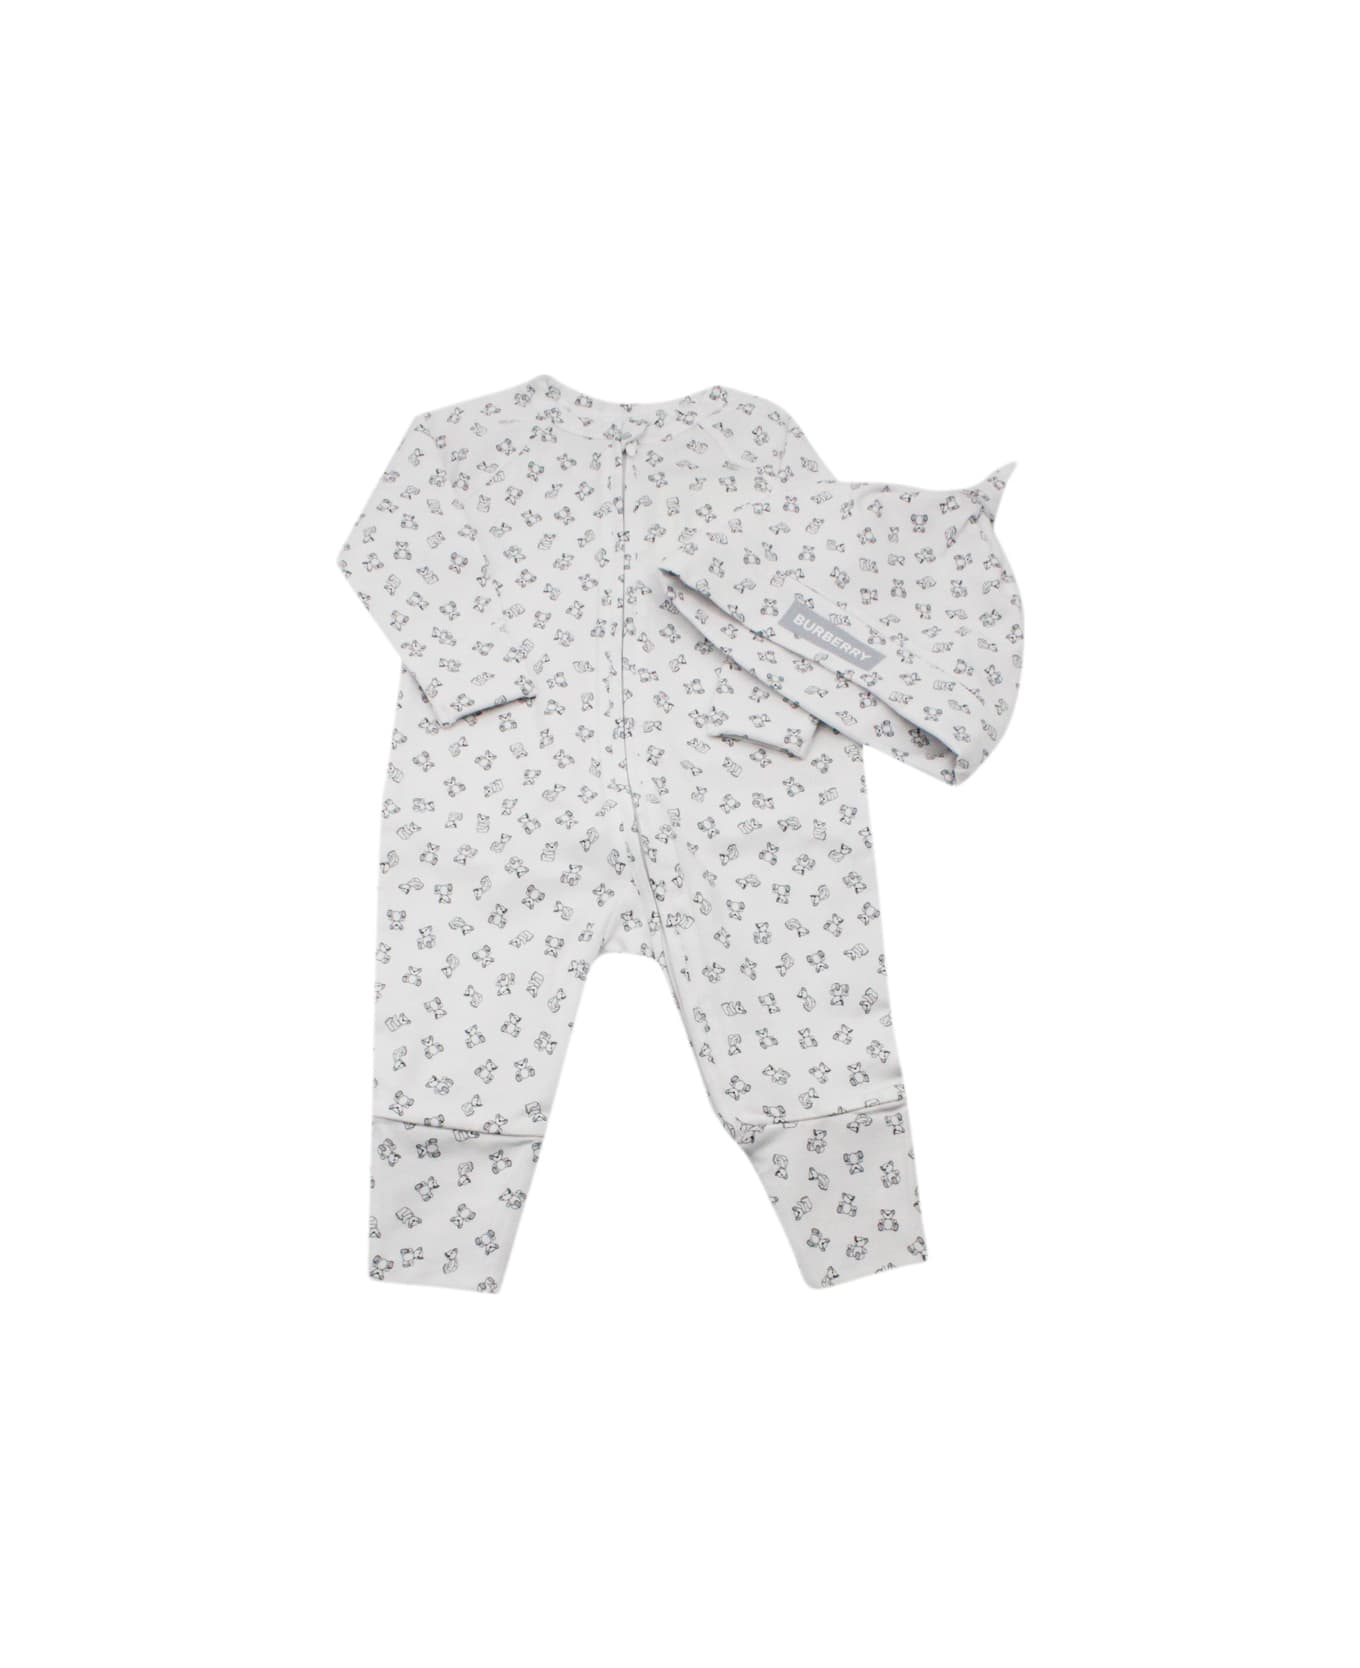 Burberry Complete Gift Set Consisting Of Onesie + Cotton Cap With Thomas Teddy backpack Print - White